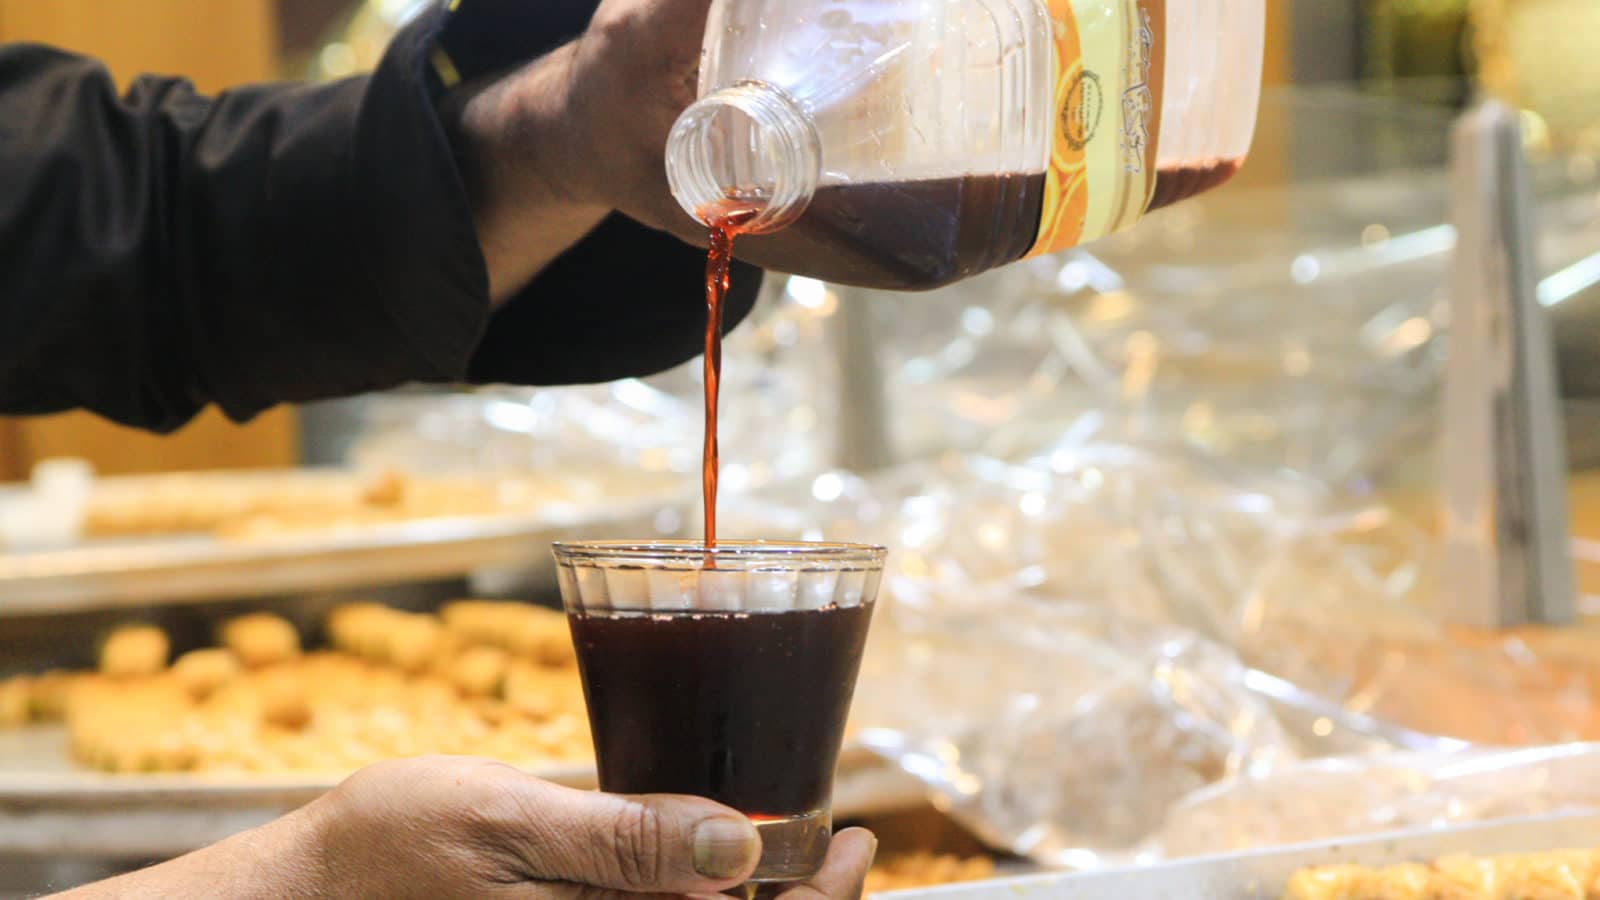 Regional Drinks That We Love Pouring During Ramadan